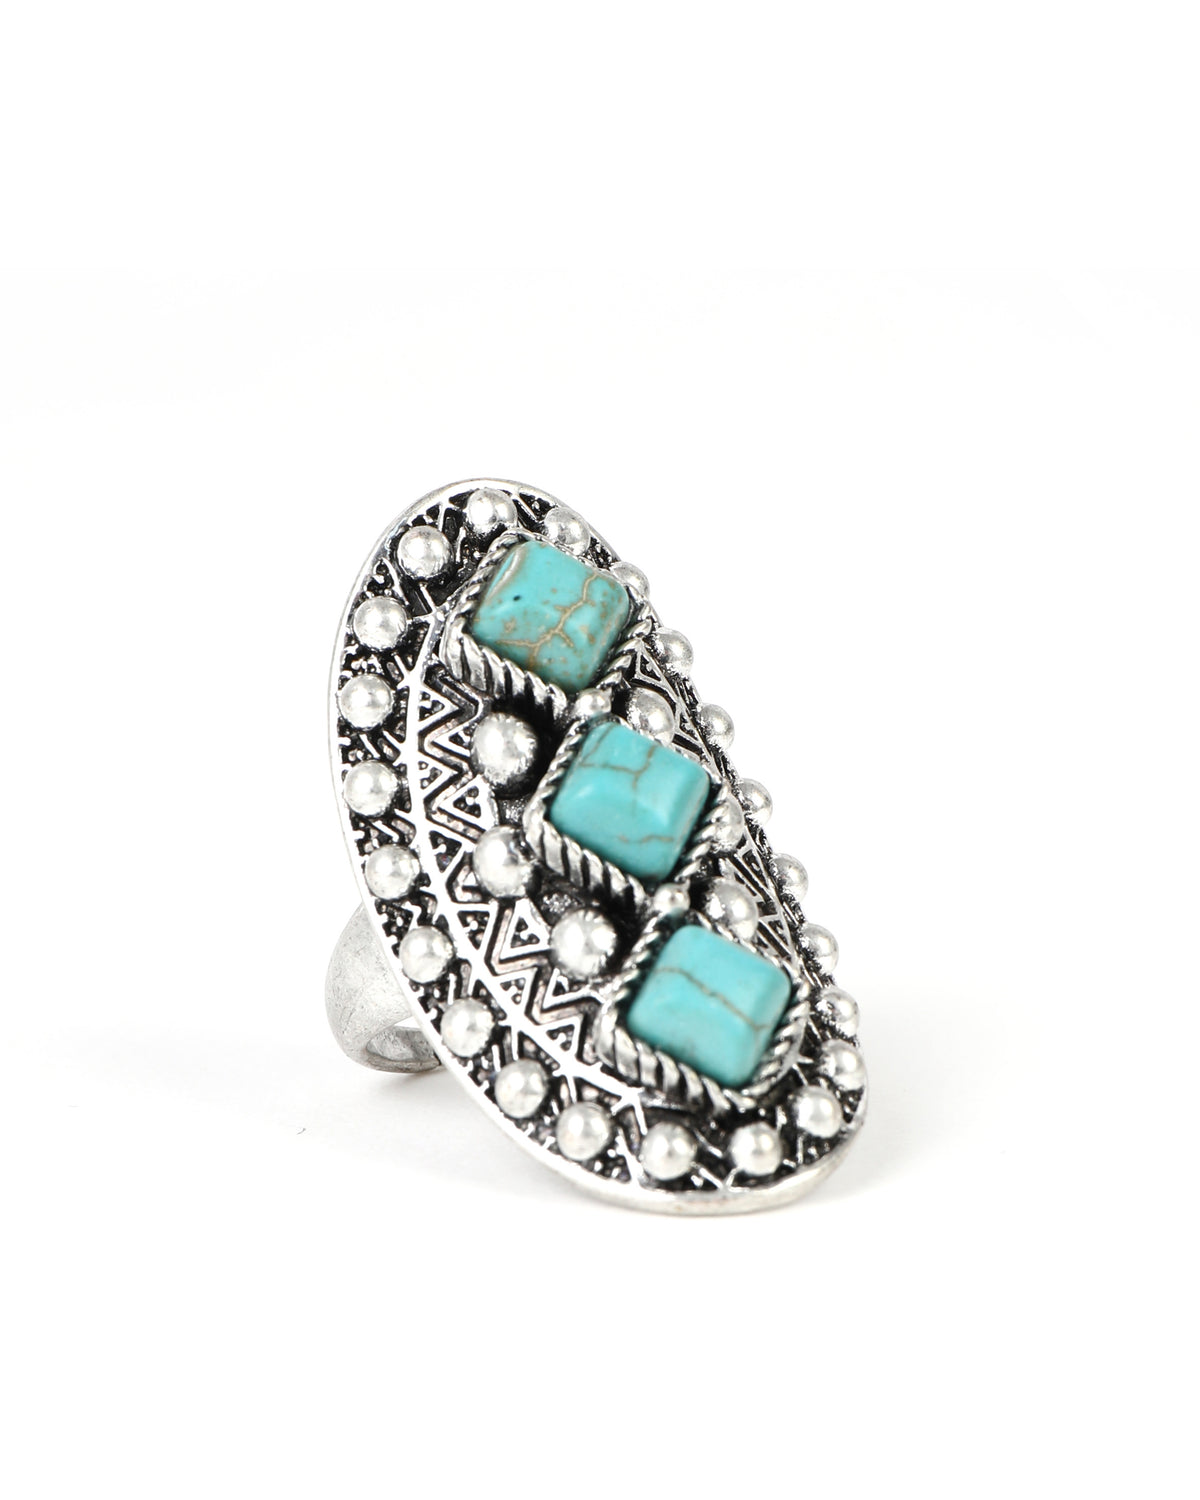 Steppin’ Stone Ring